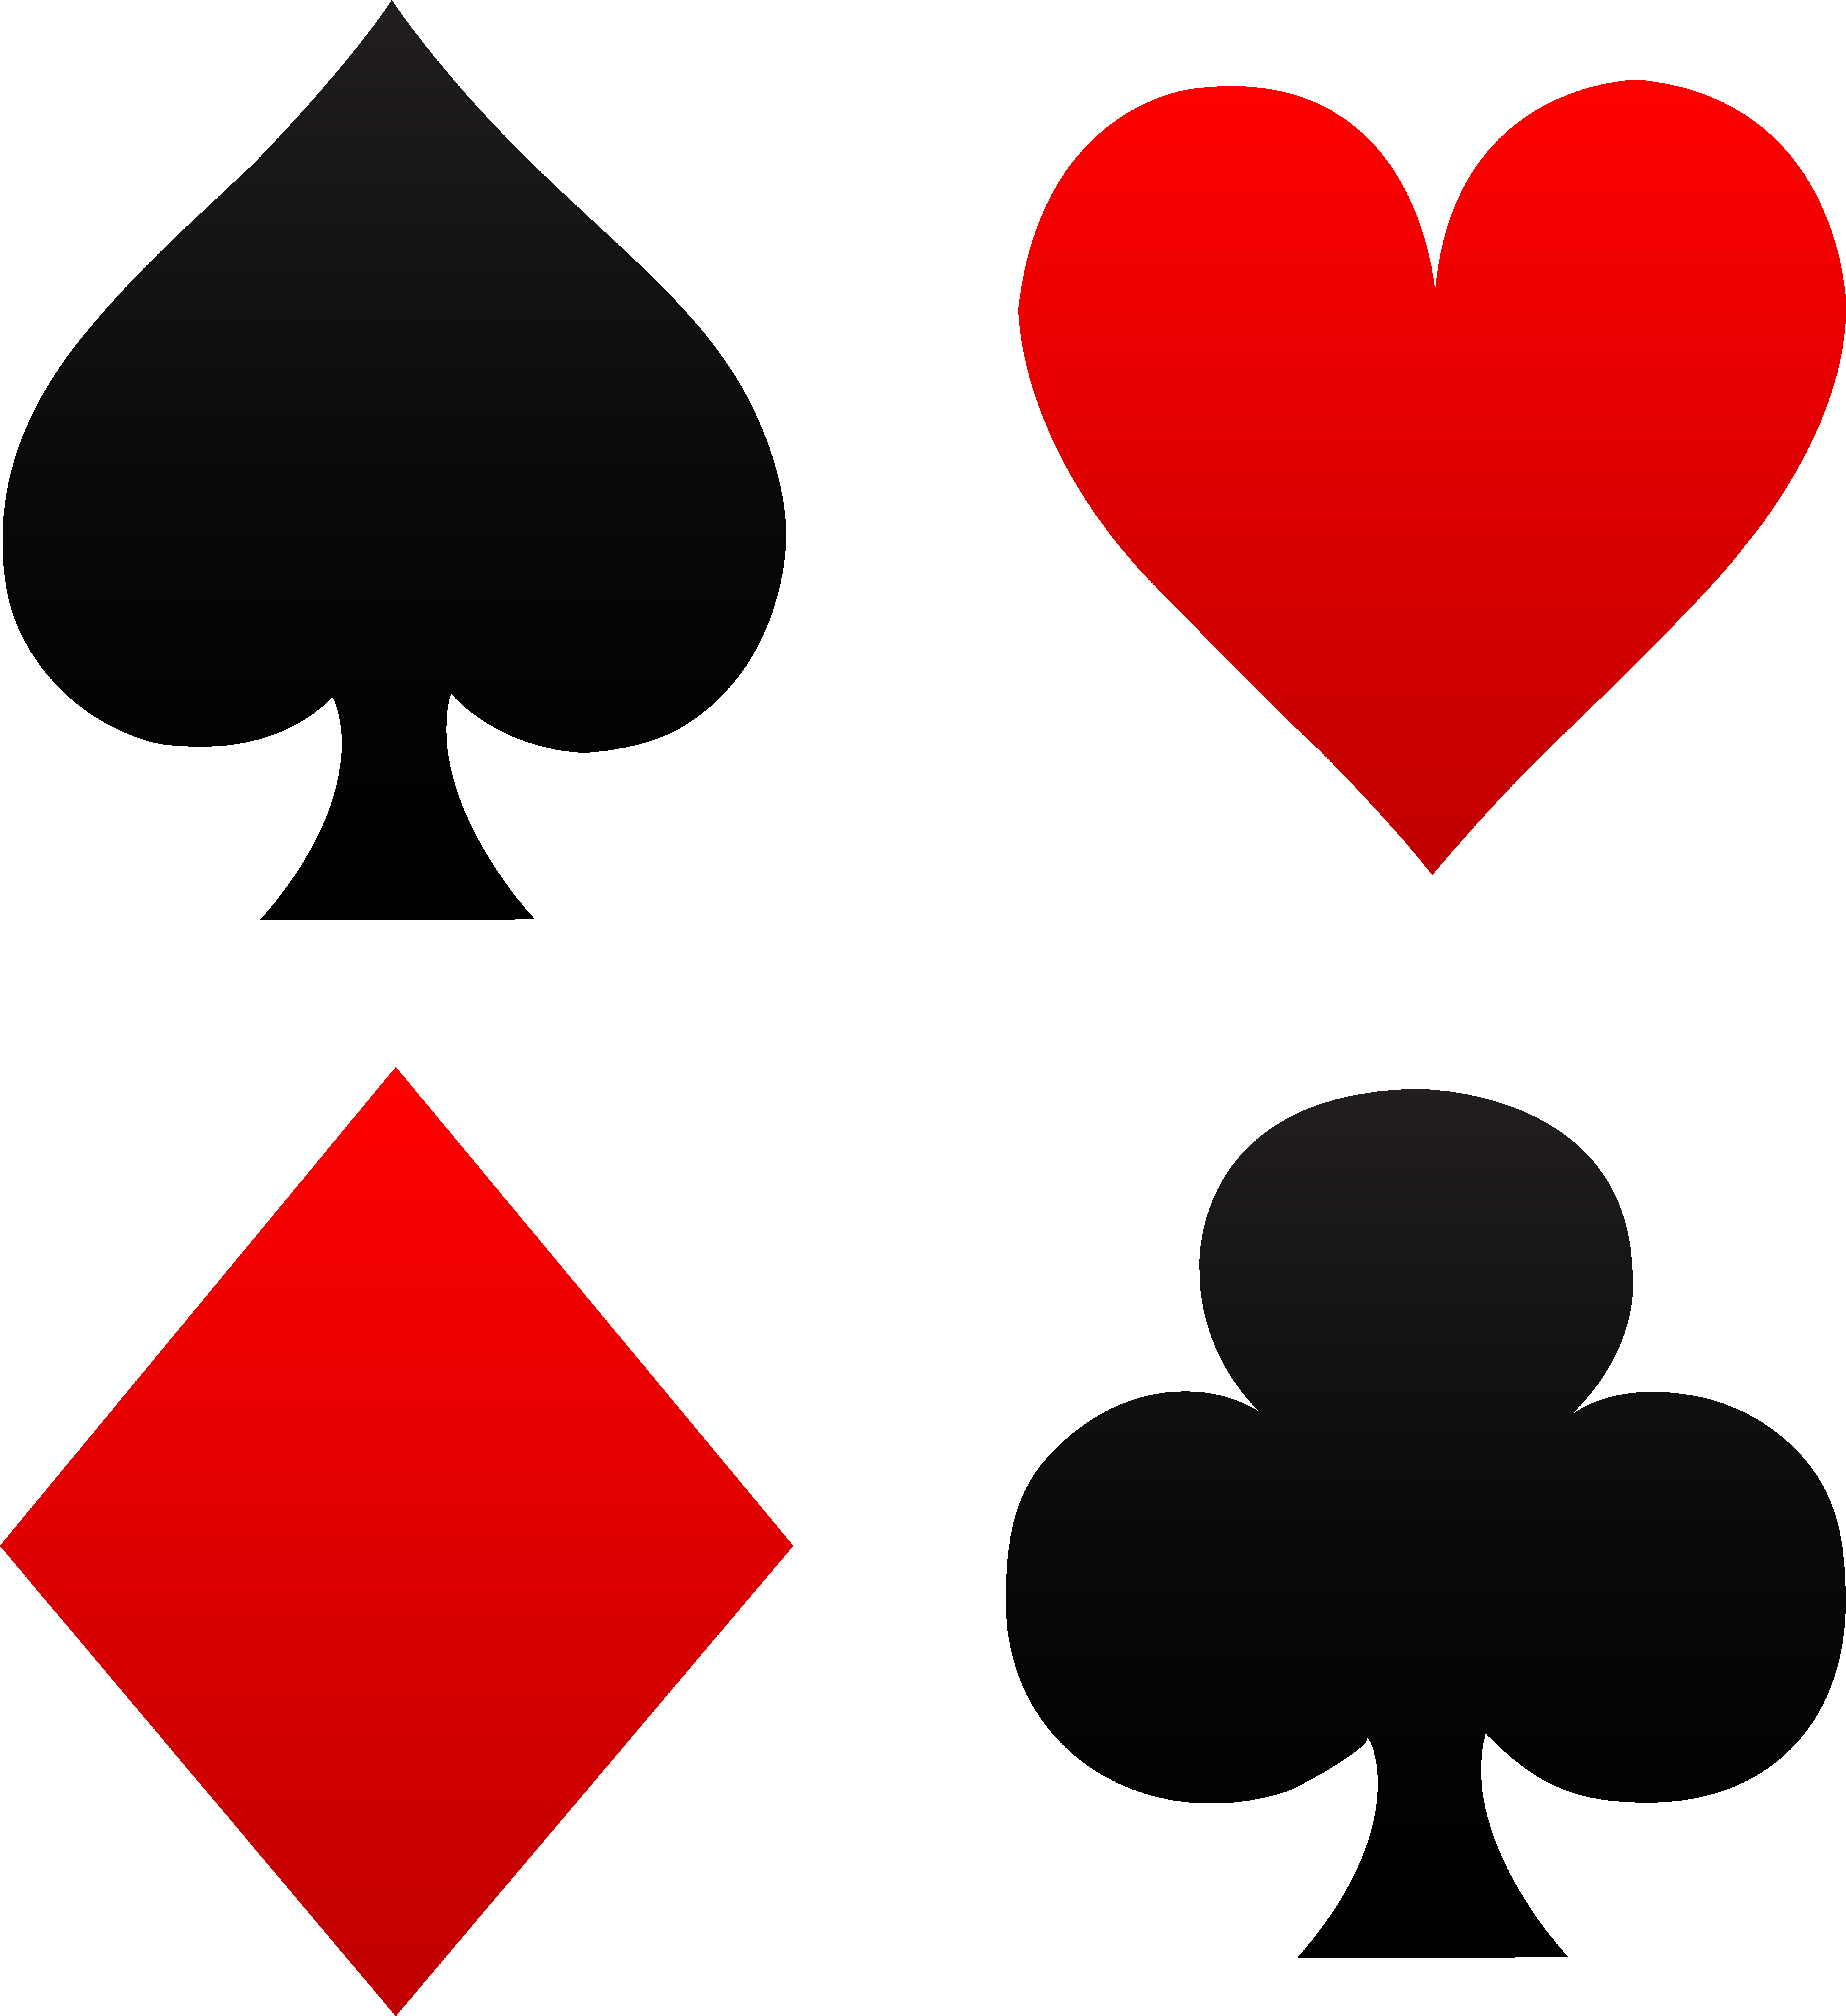 Clipart images playing cards diamond shape